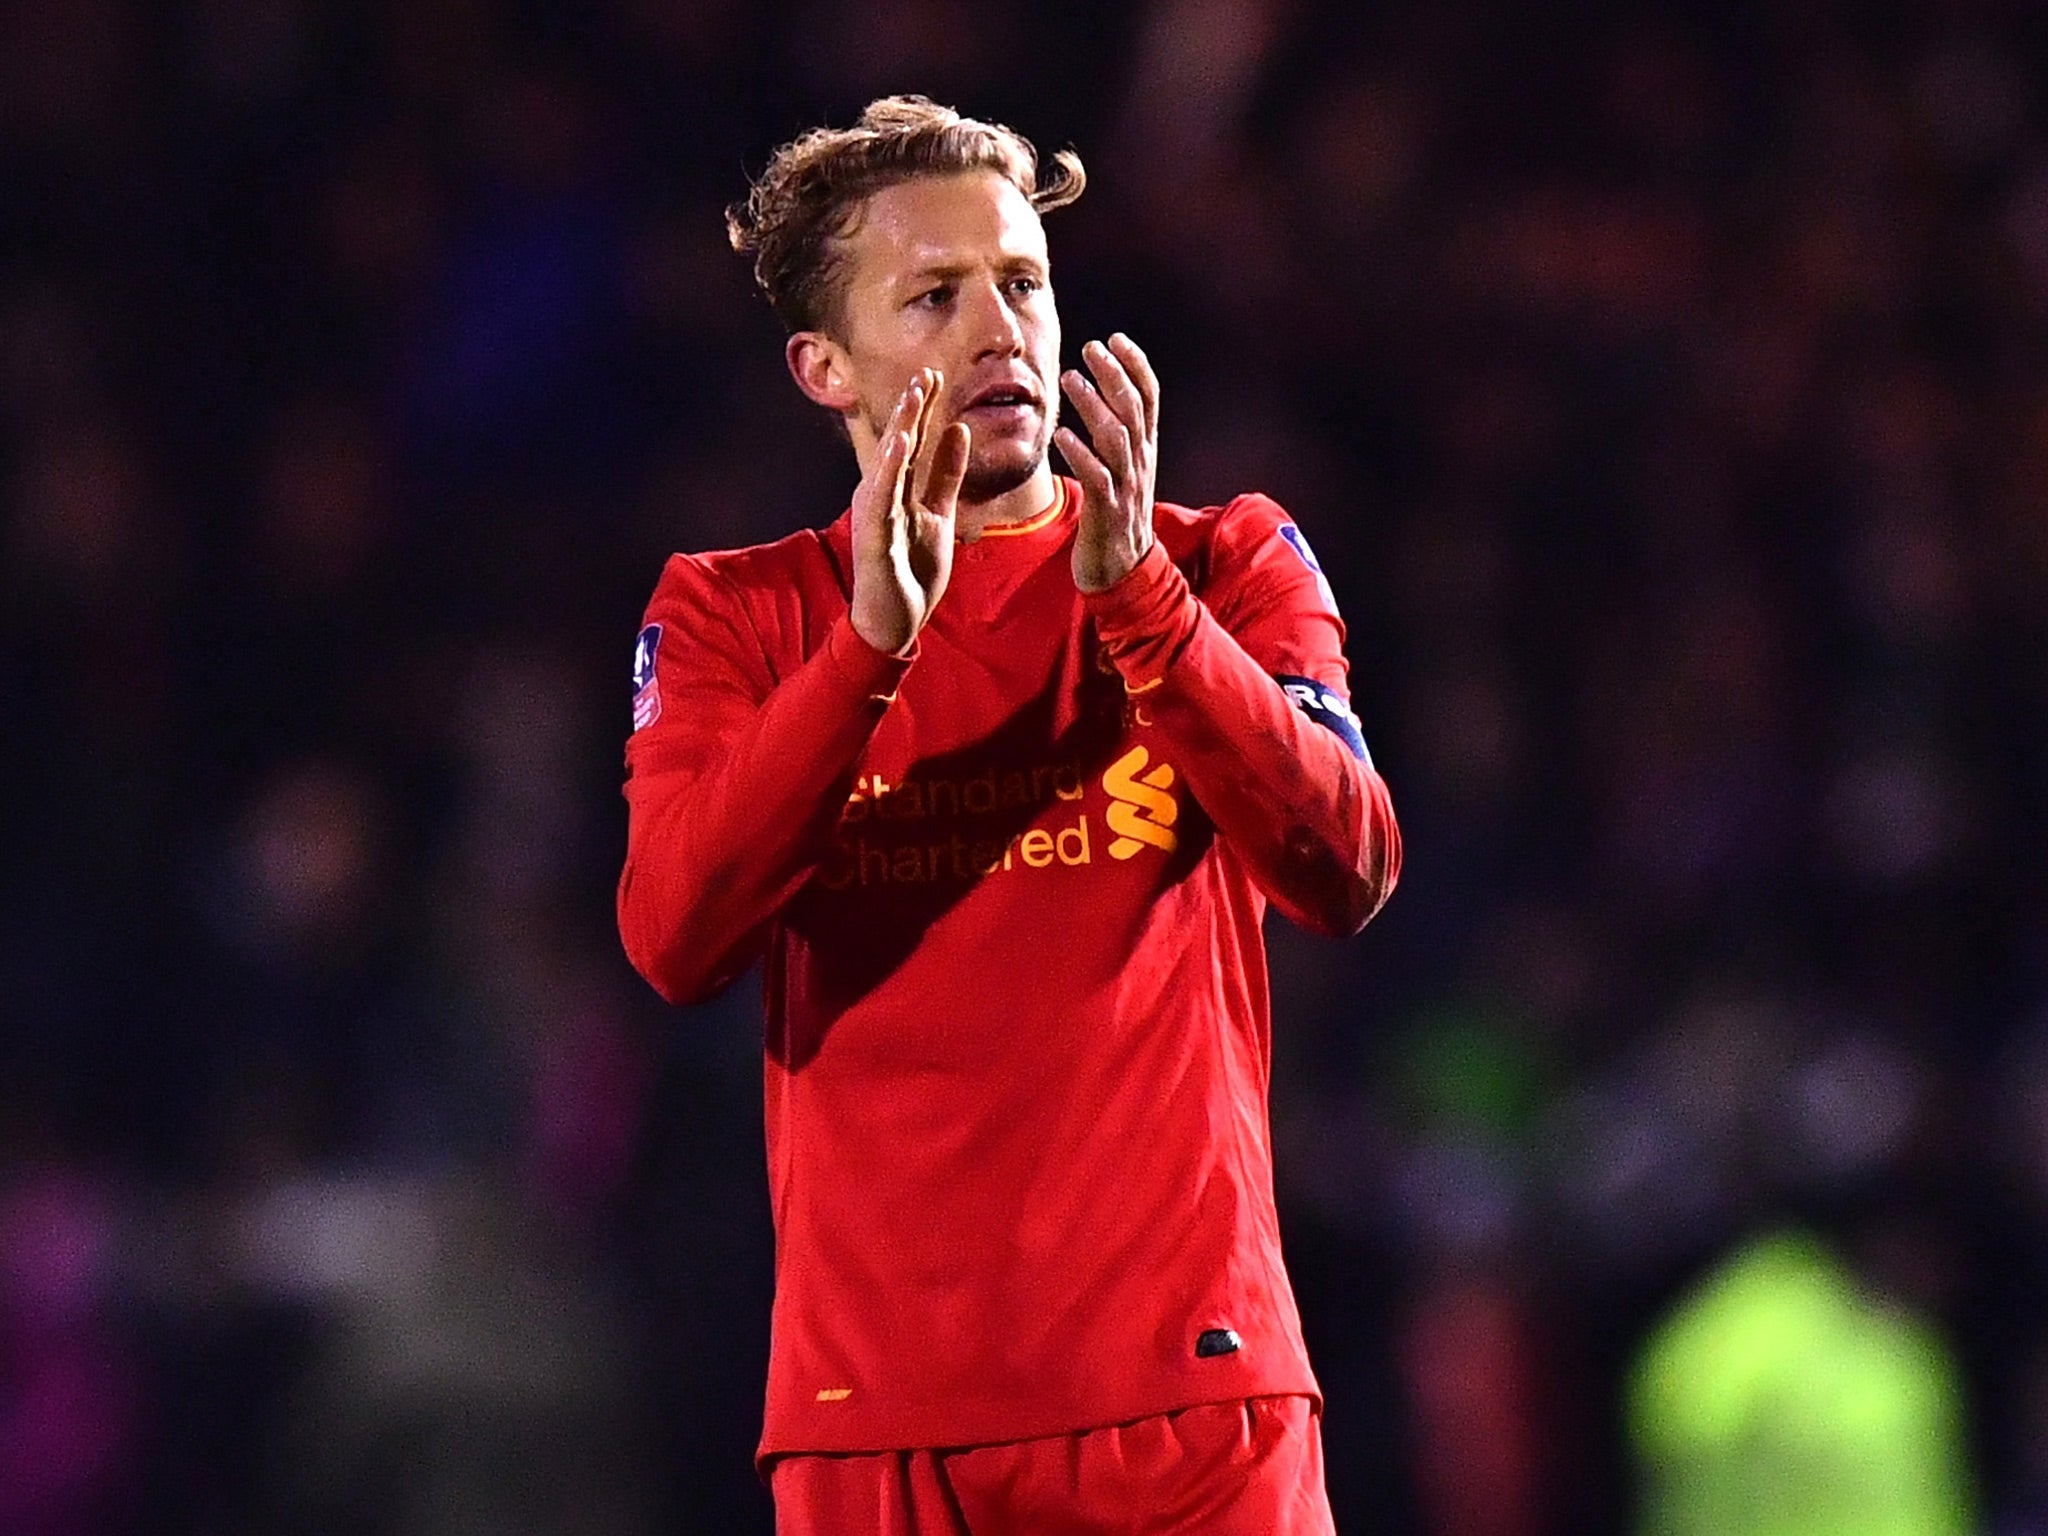 Lucas has been a faithful servant to Liverpool, but believes his Anfield days may soon be over